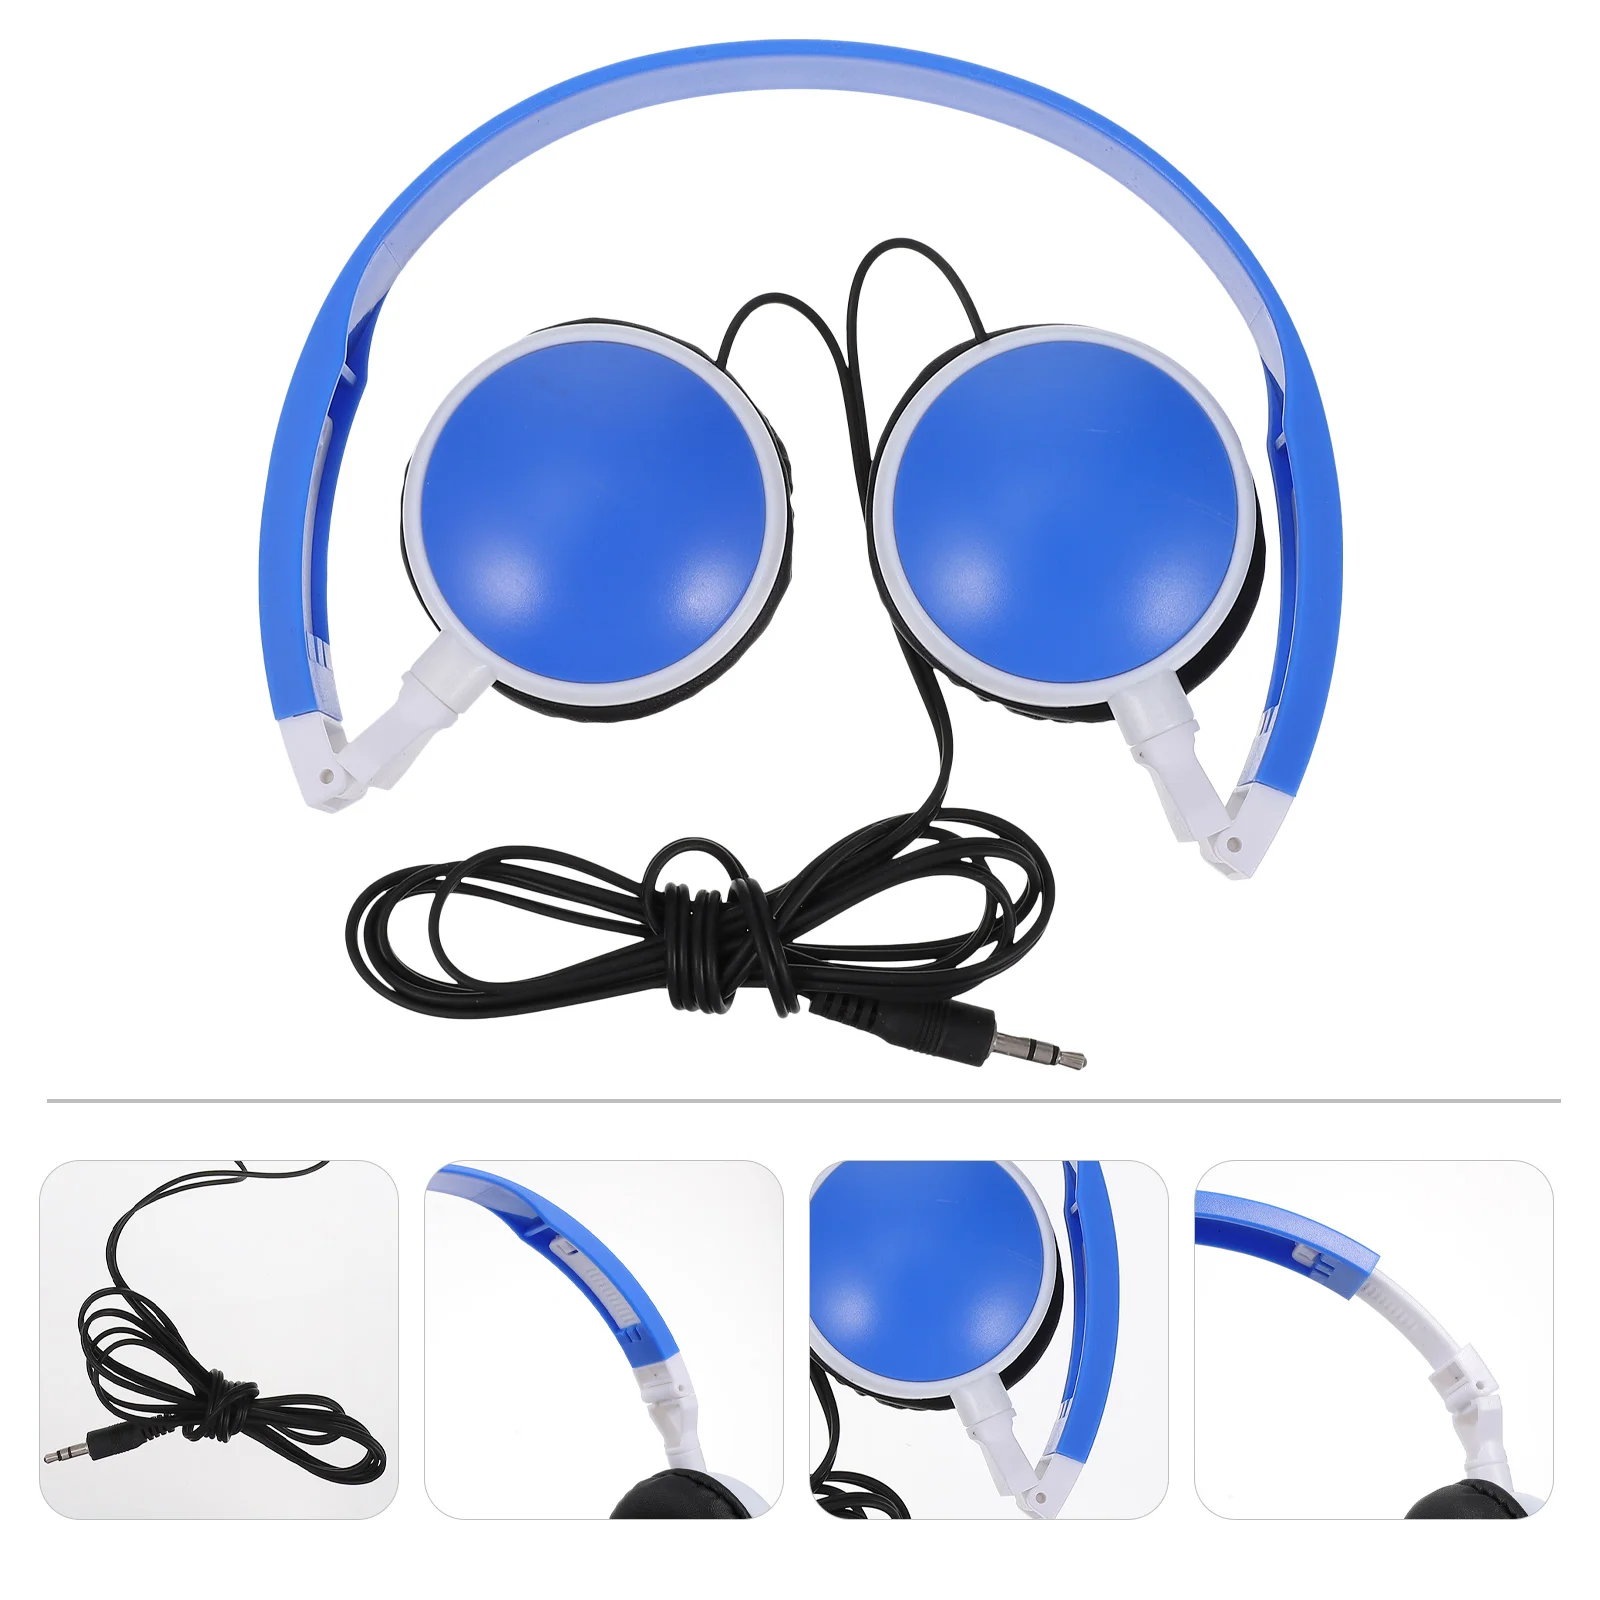 

Headset Wired Headphones Noisewireless Children Kids Studentsearbuds True Headphone Cancelling Reduction Headsets Pc Laptop Kid